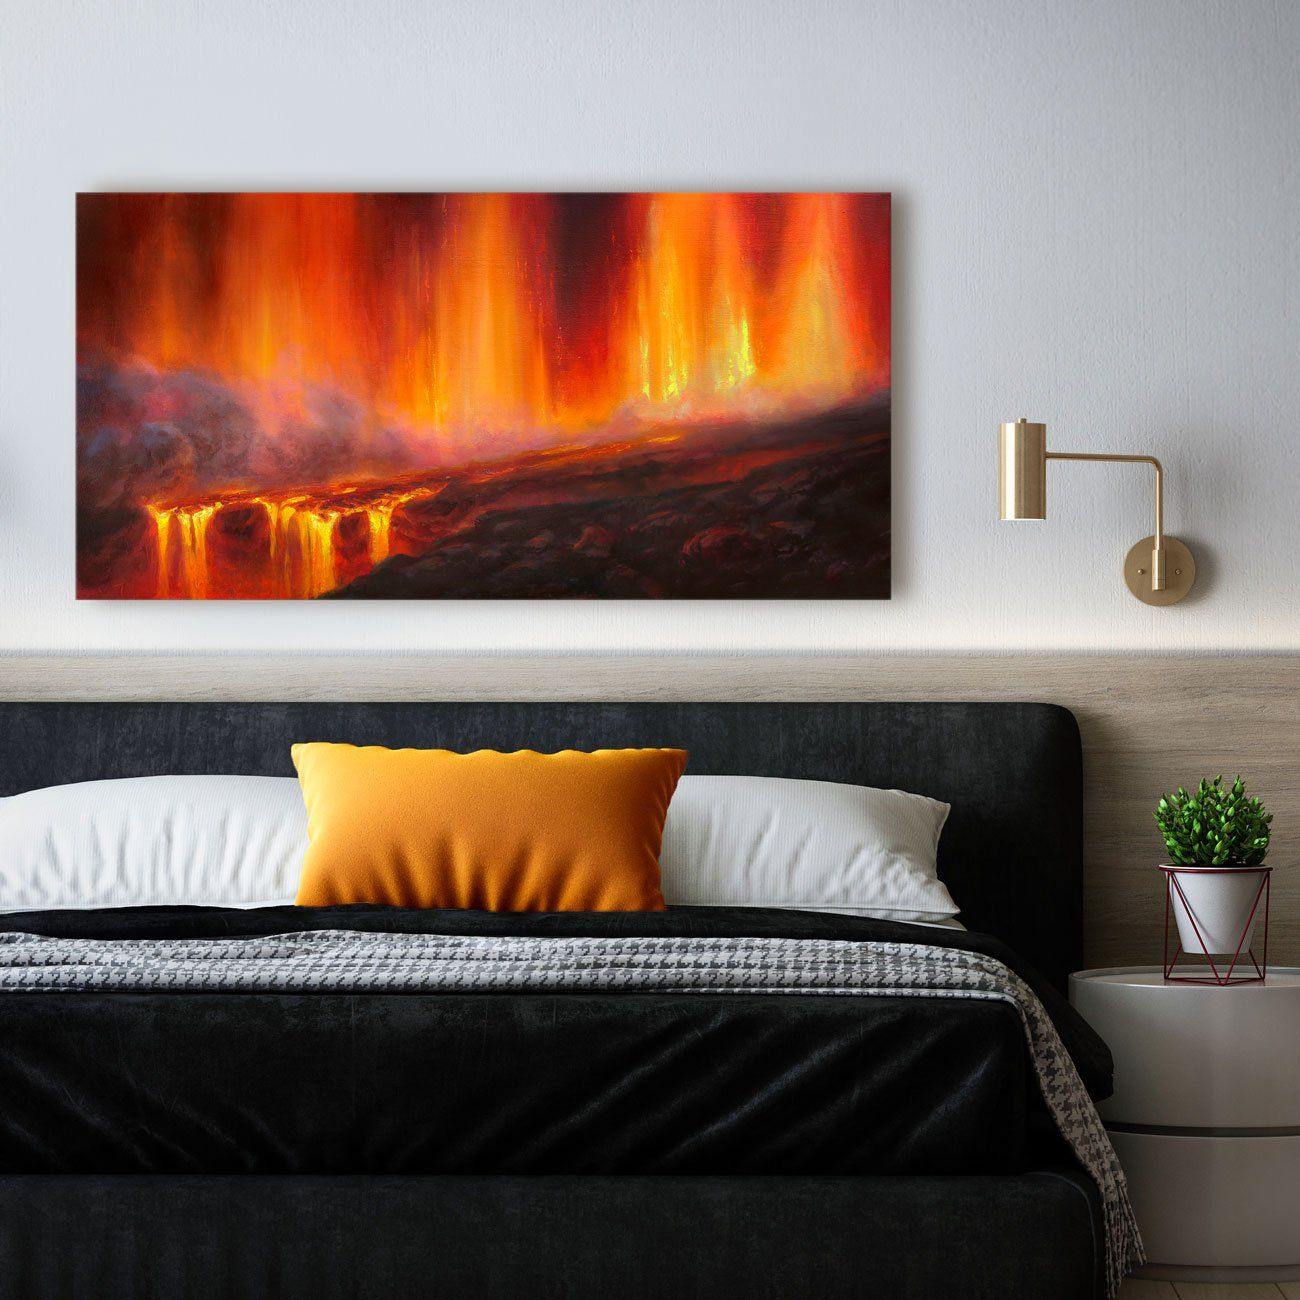 Erupting Kilauea Volcano painting on canvas with molten lava by artist Karen Whitworth